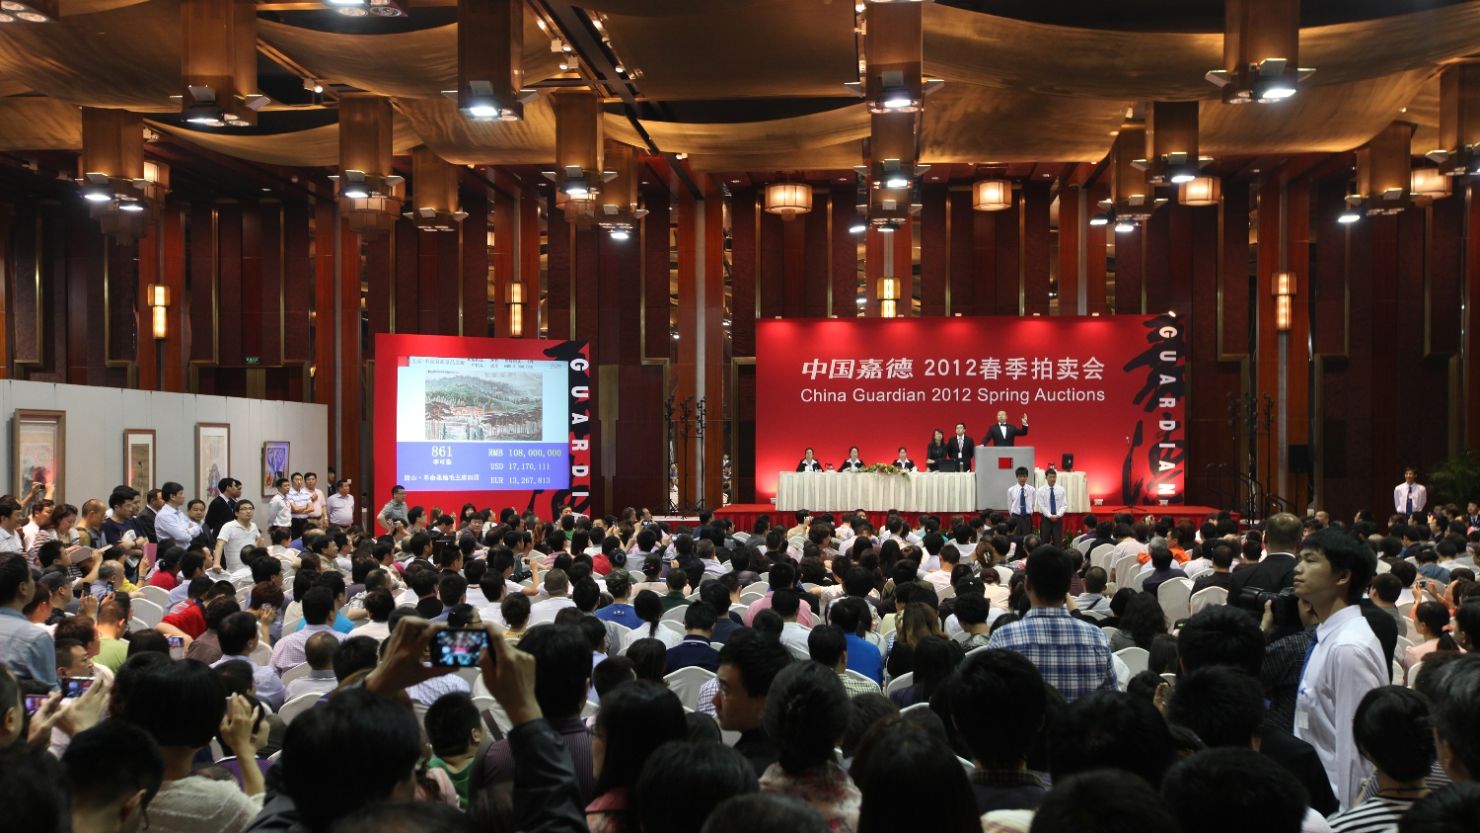 Packed salerooms like this have helped China Guardian become the world's fourth largest auction house